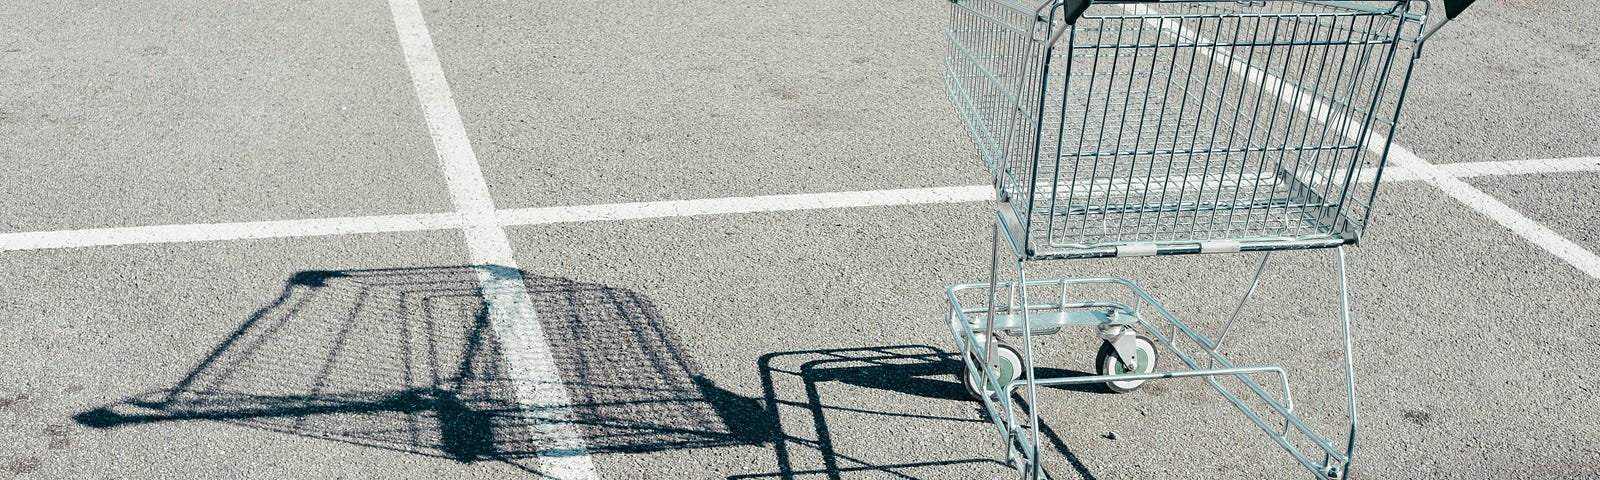 A lone shopping cart in an empty parking lot. Was it abandoned by someone who does not align with the The Shopping Cart Theory?